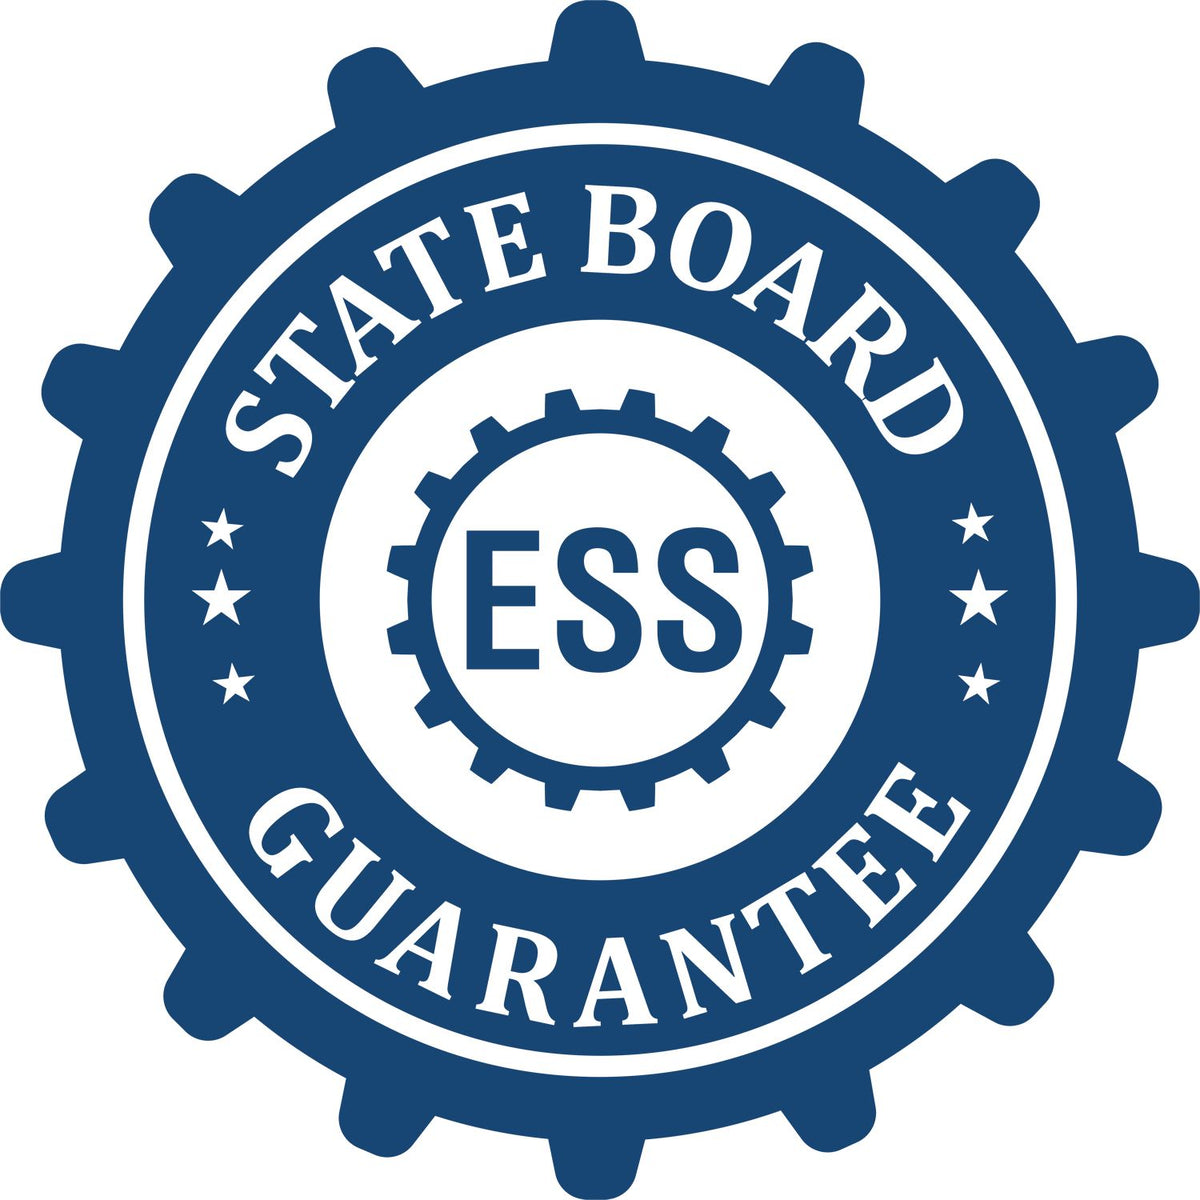 An emblem in a gear shape illustrating a state board guarantee for the Soft Massachusetts Professional Engineer Seal product.